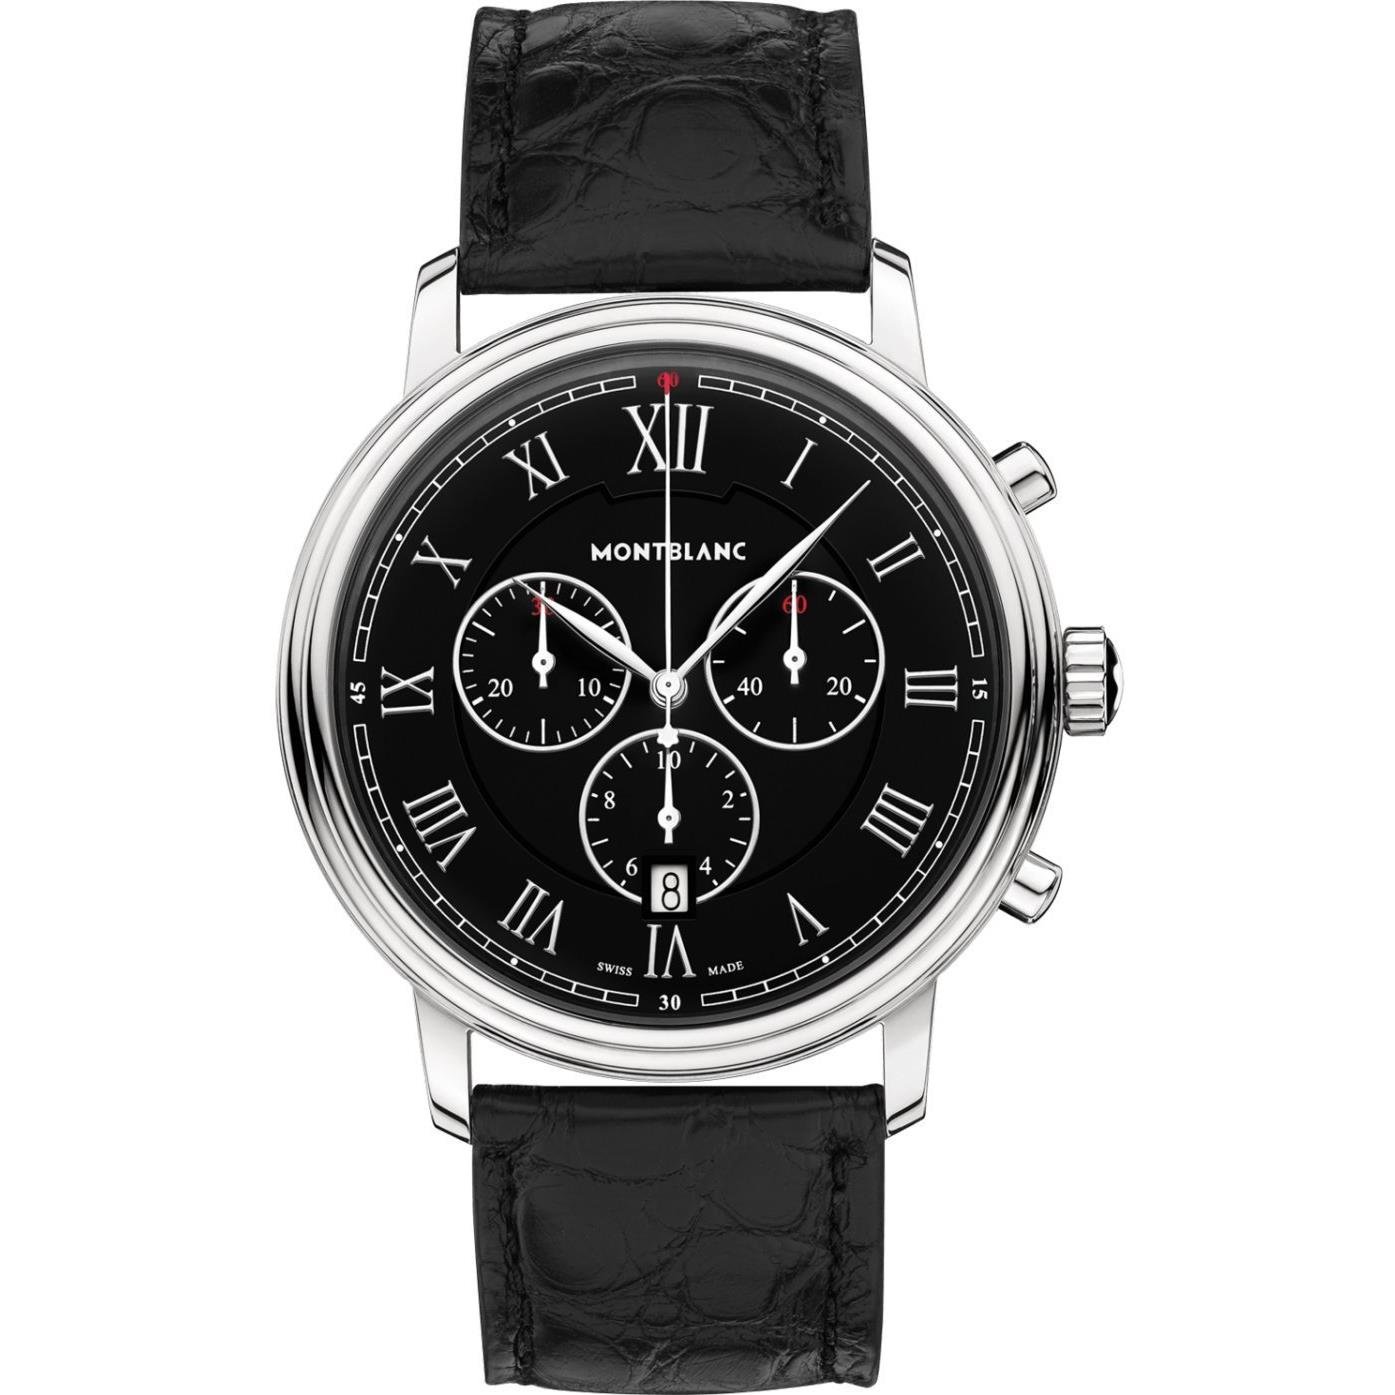 Montblanc Tradition Chronograph Black Dial Men's Watch 117047